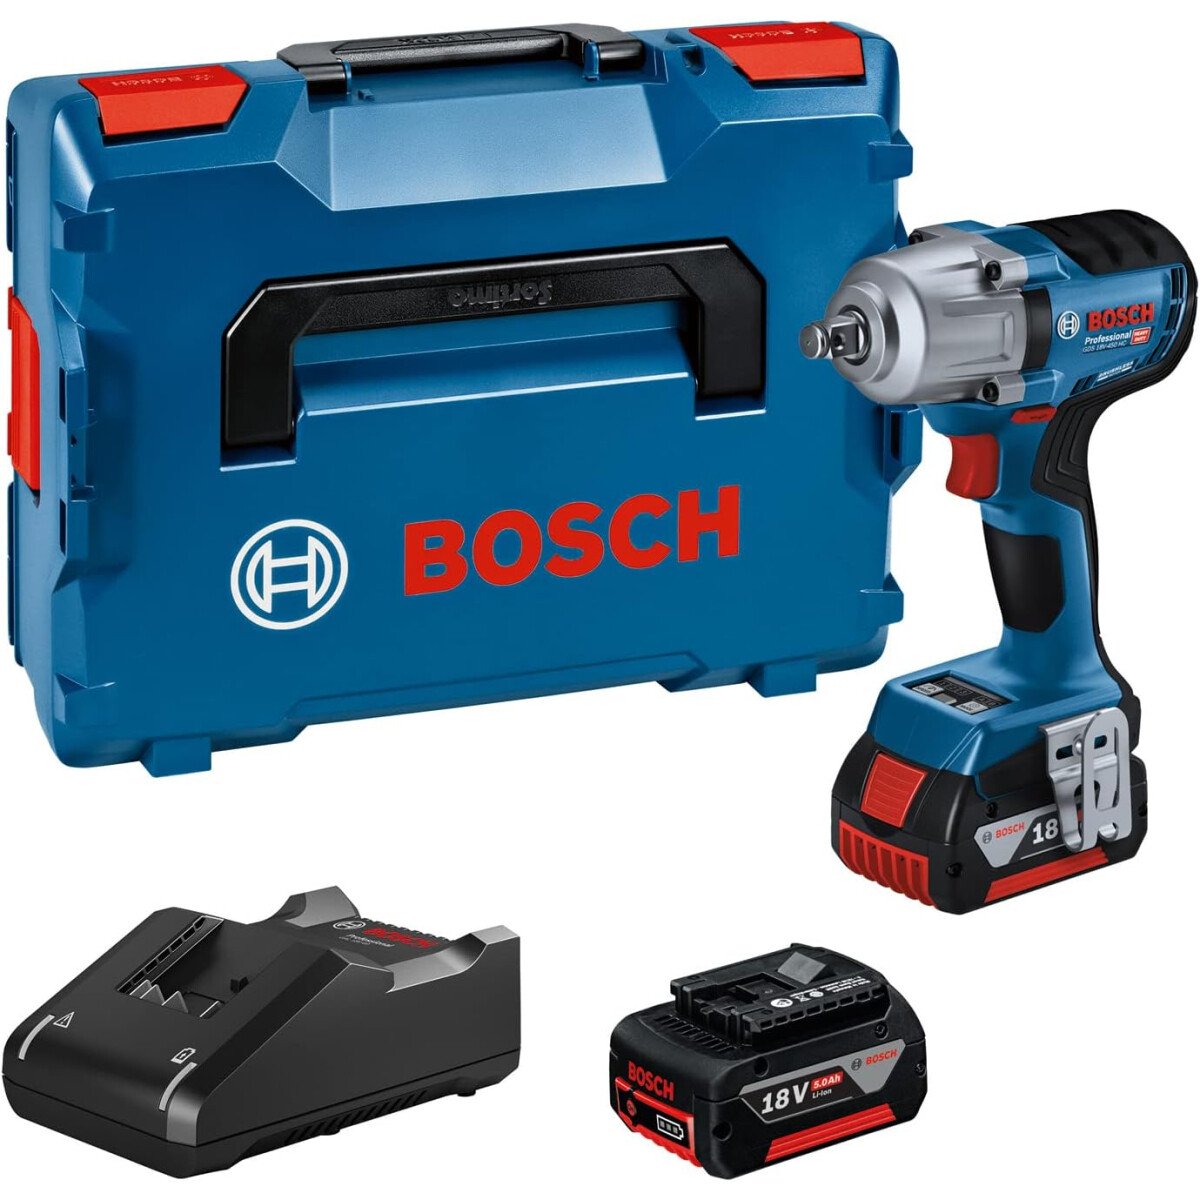 Bosch GDS 18V-450 PC 18v BRUSHLESS Mid-Torque Impact Wrench 1/2" Connected (2x 4.0Ah ProCORE18V) in L-Boxx